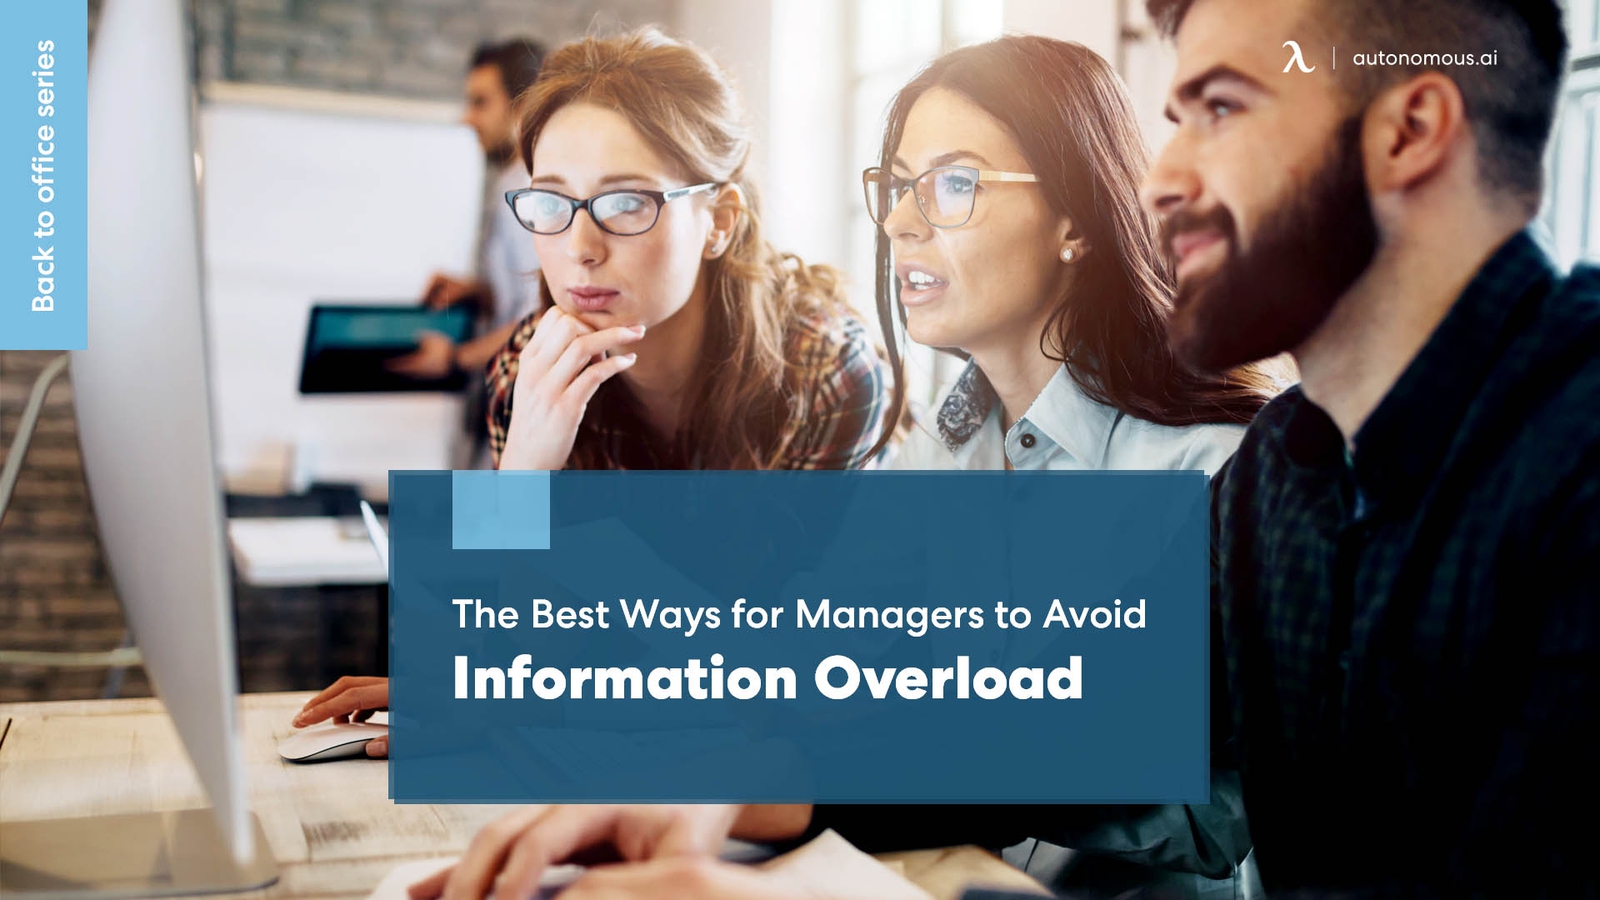 The Best Ways for Managers to Avoid Information Overload